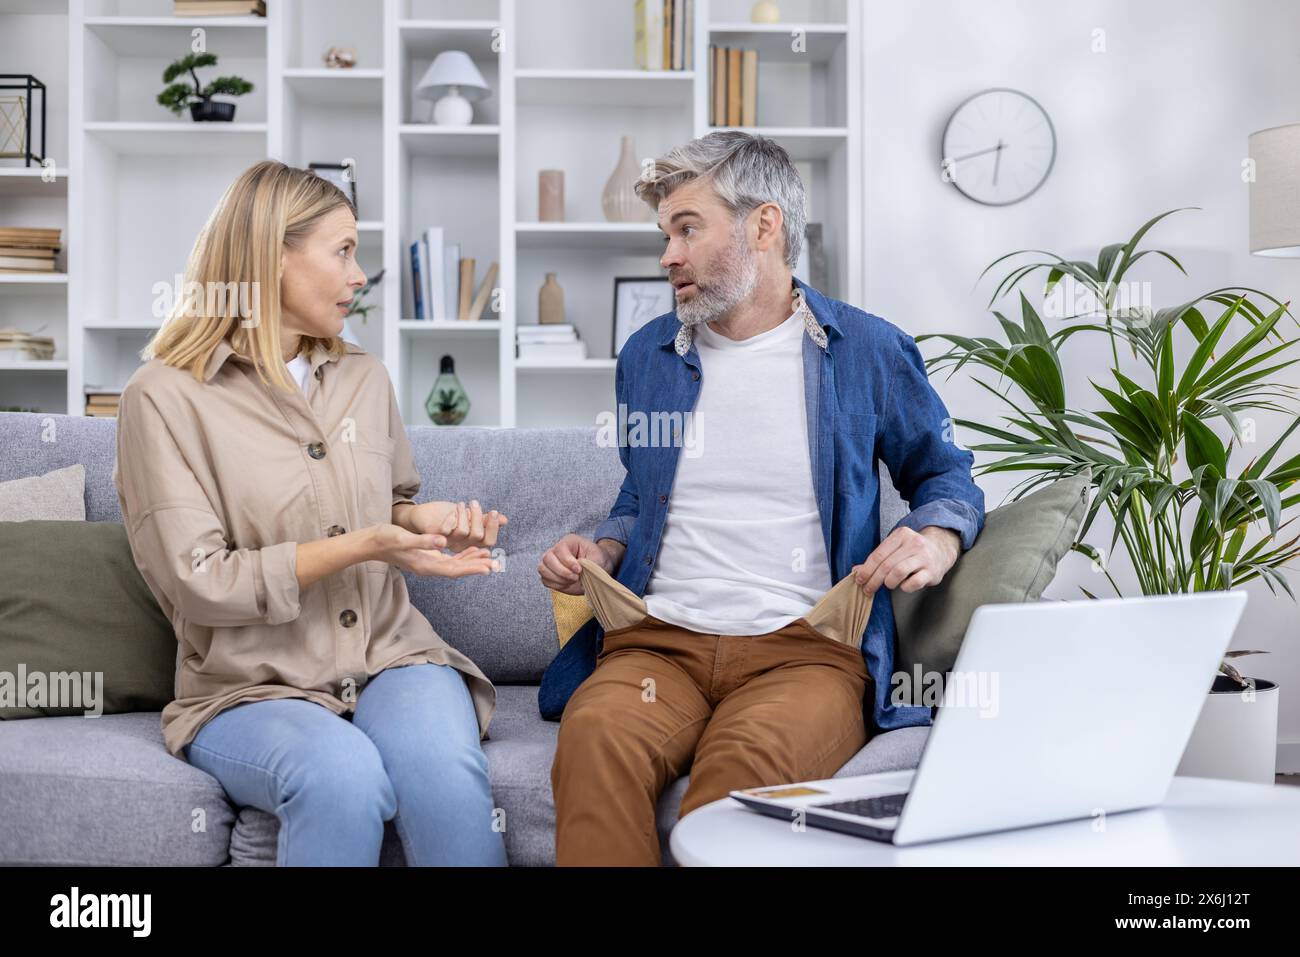 Middle-aged couple engaged in a serious conversation about financial issues, sitting on a cozy sofa in their living room. Stock Photo